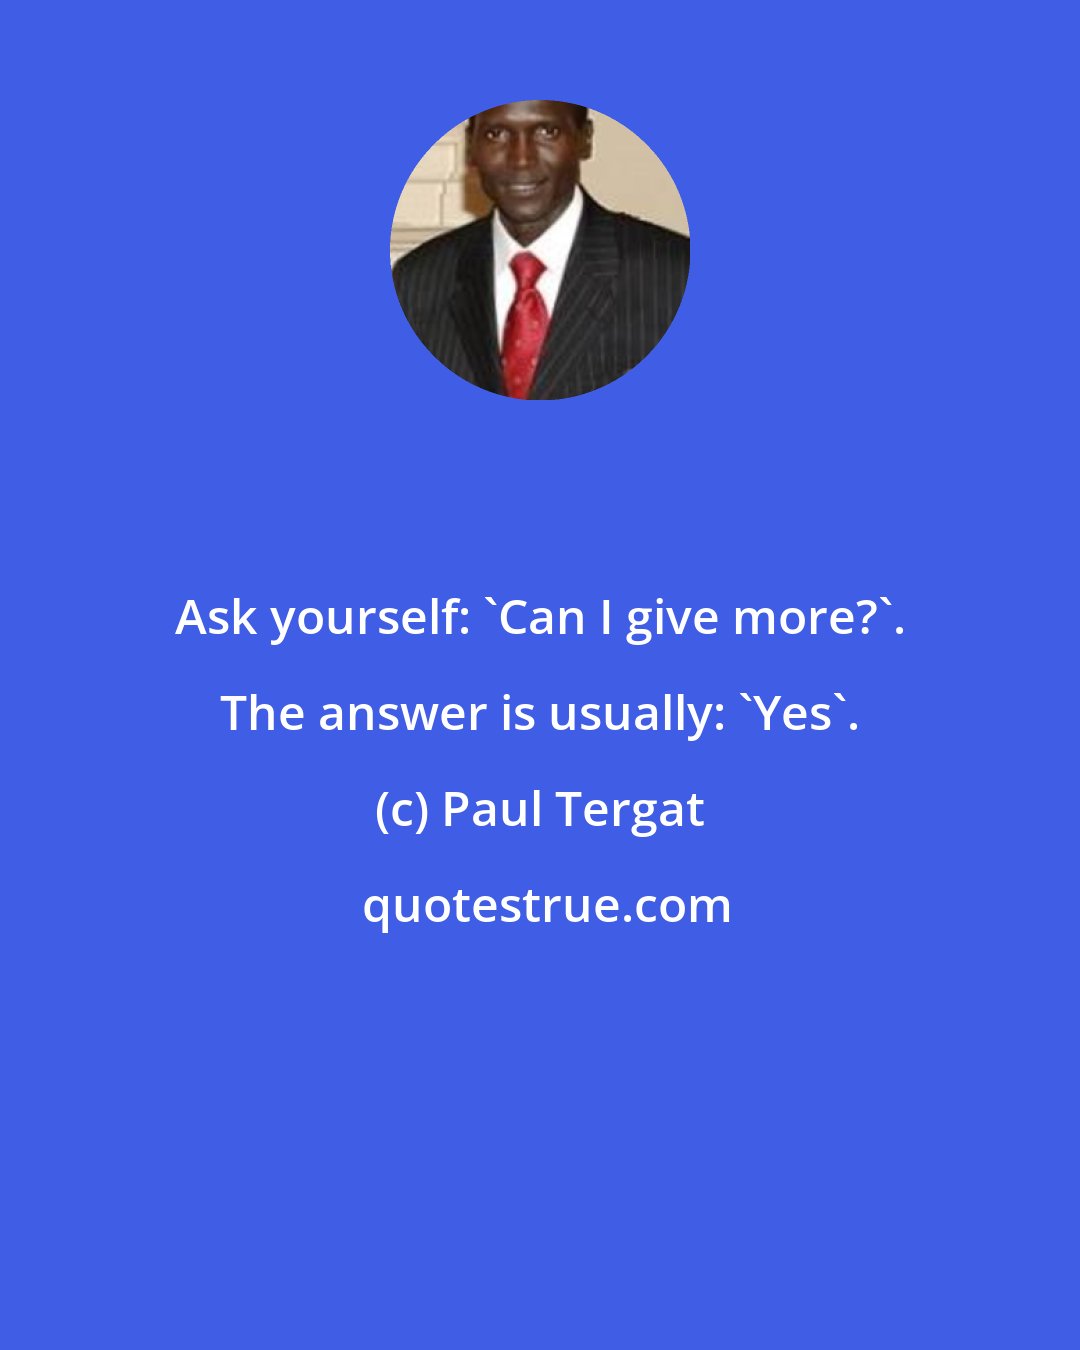 Paul Tergat: Ask yourself: 'Can I give more?'. The answer is usually: 'Yes'.